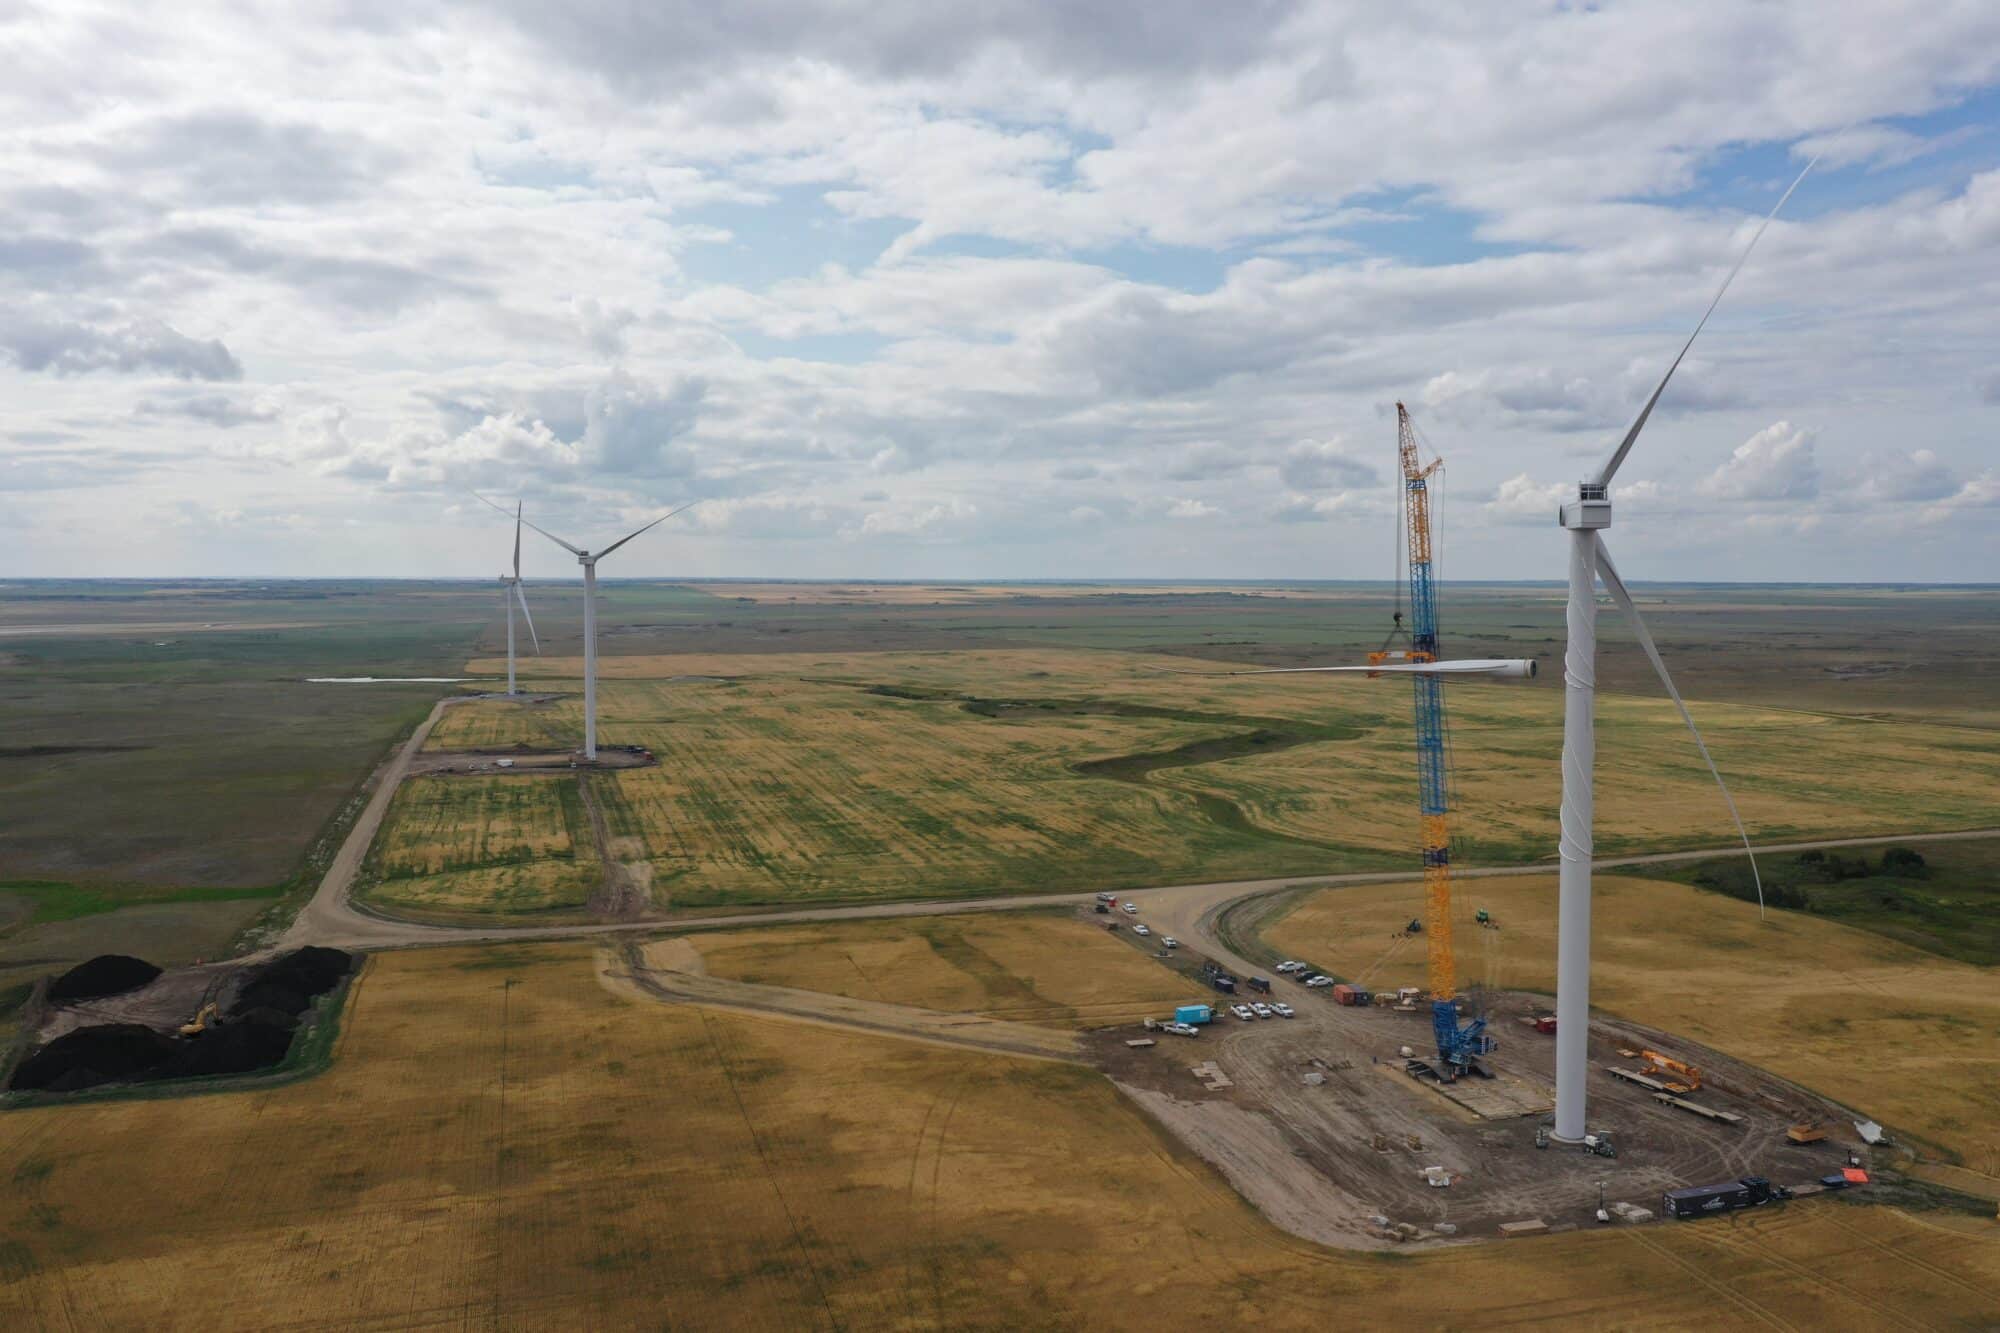 Landscape photo of three wind turbine in a green field, a crane stands next to one turbine under construction.